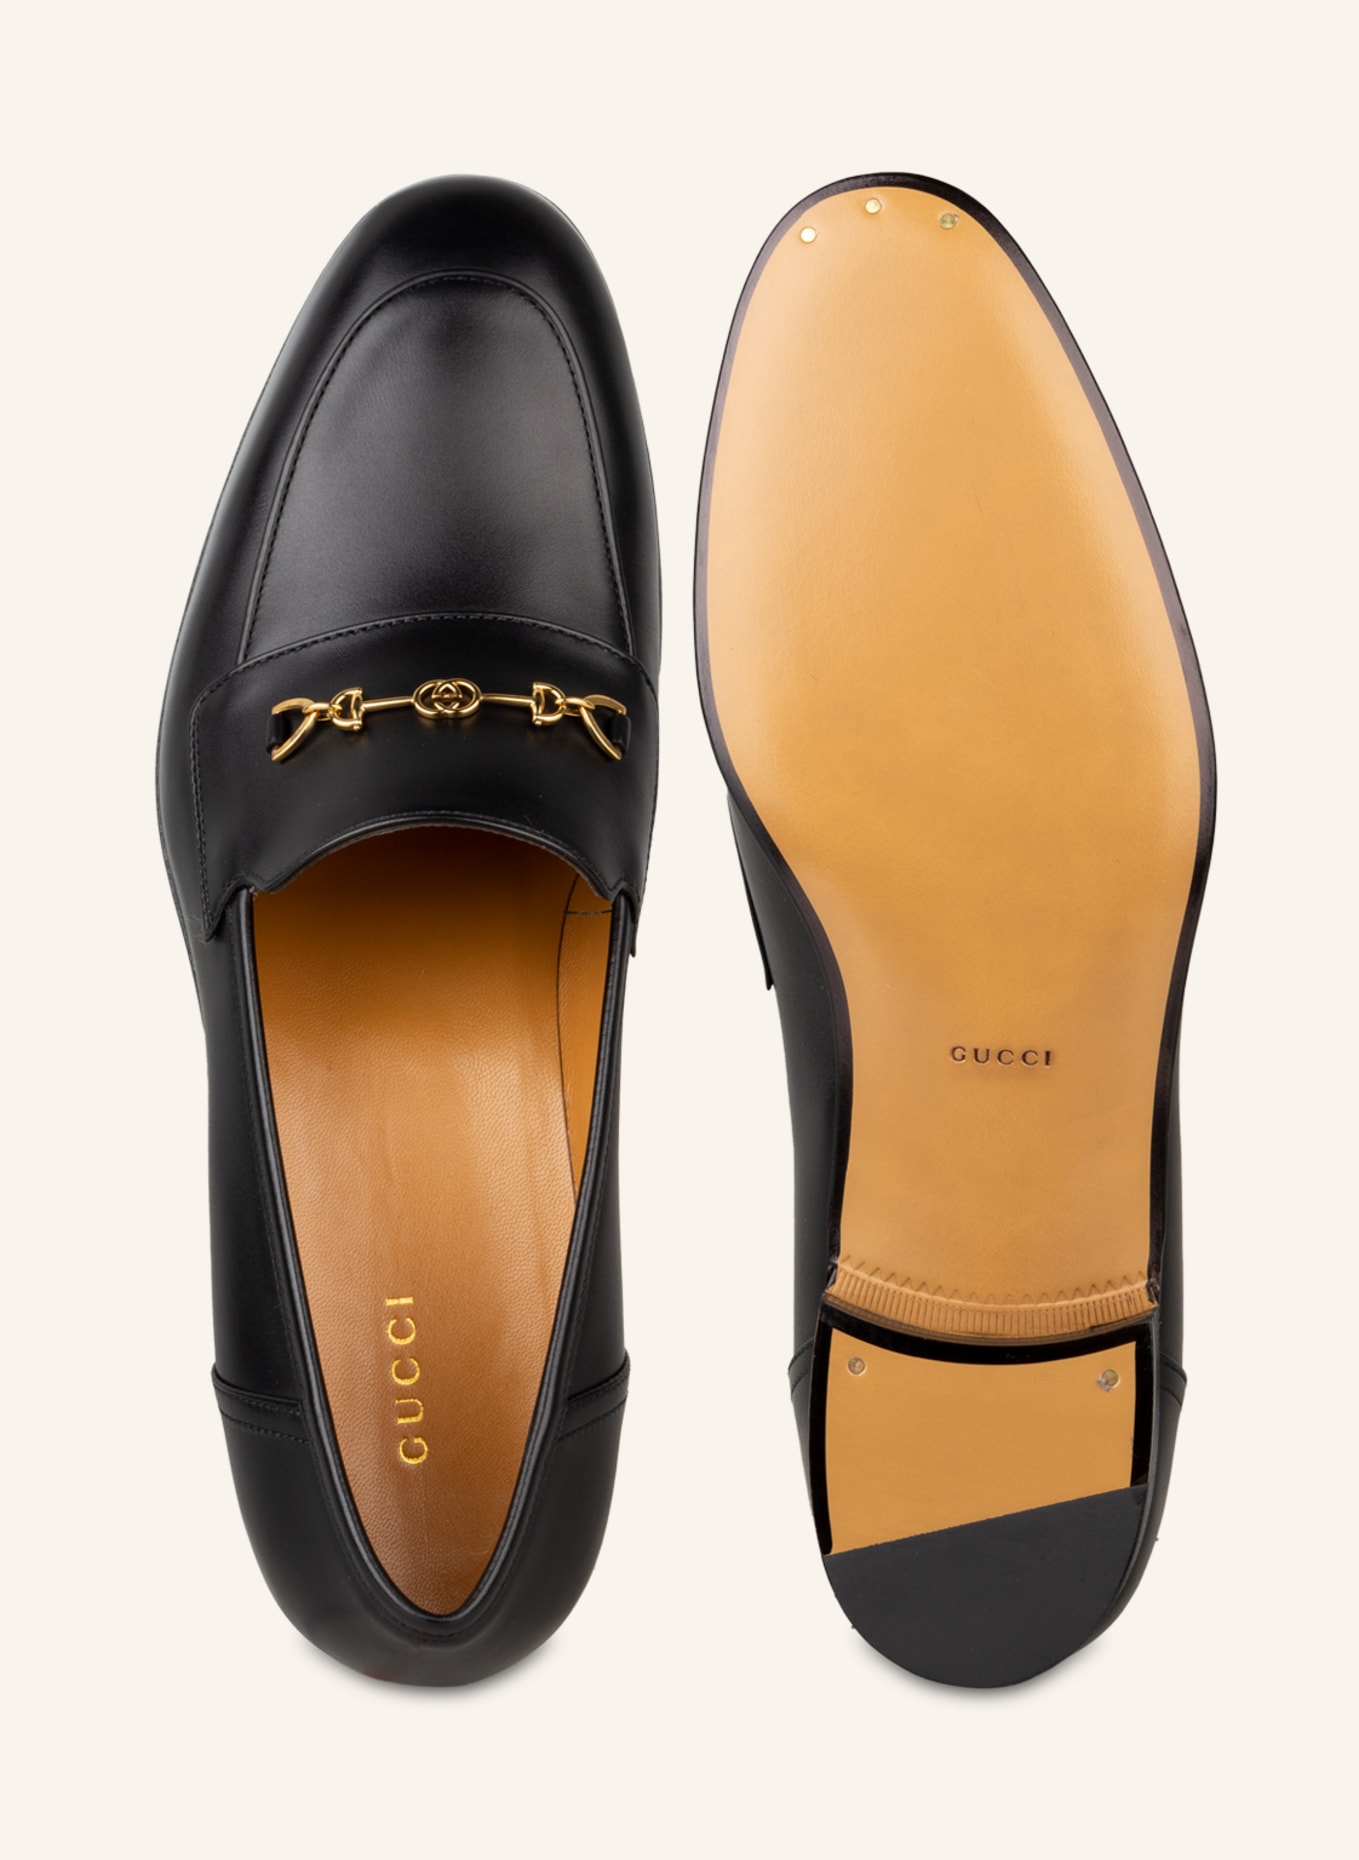 GUCCI Loafers , Color: BLACK (Image 5)